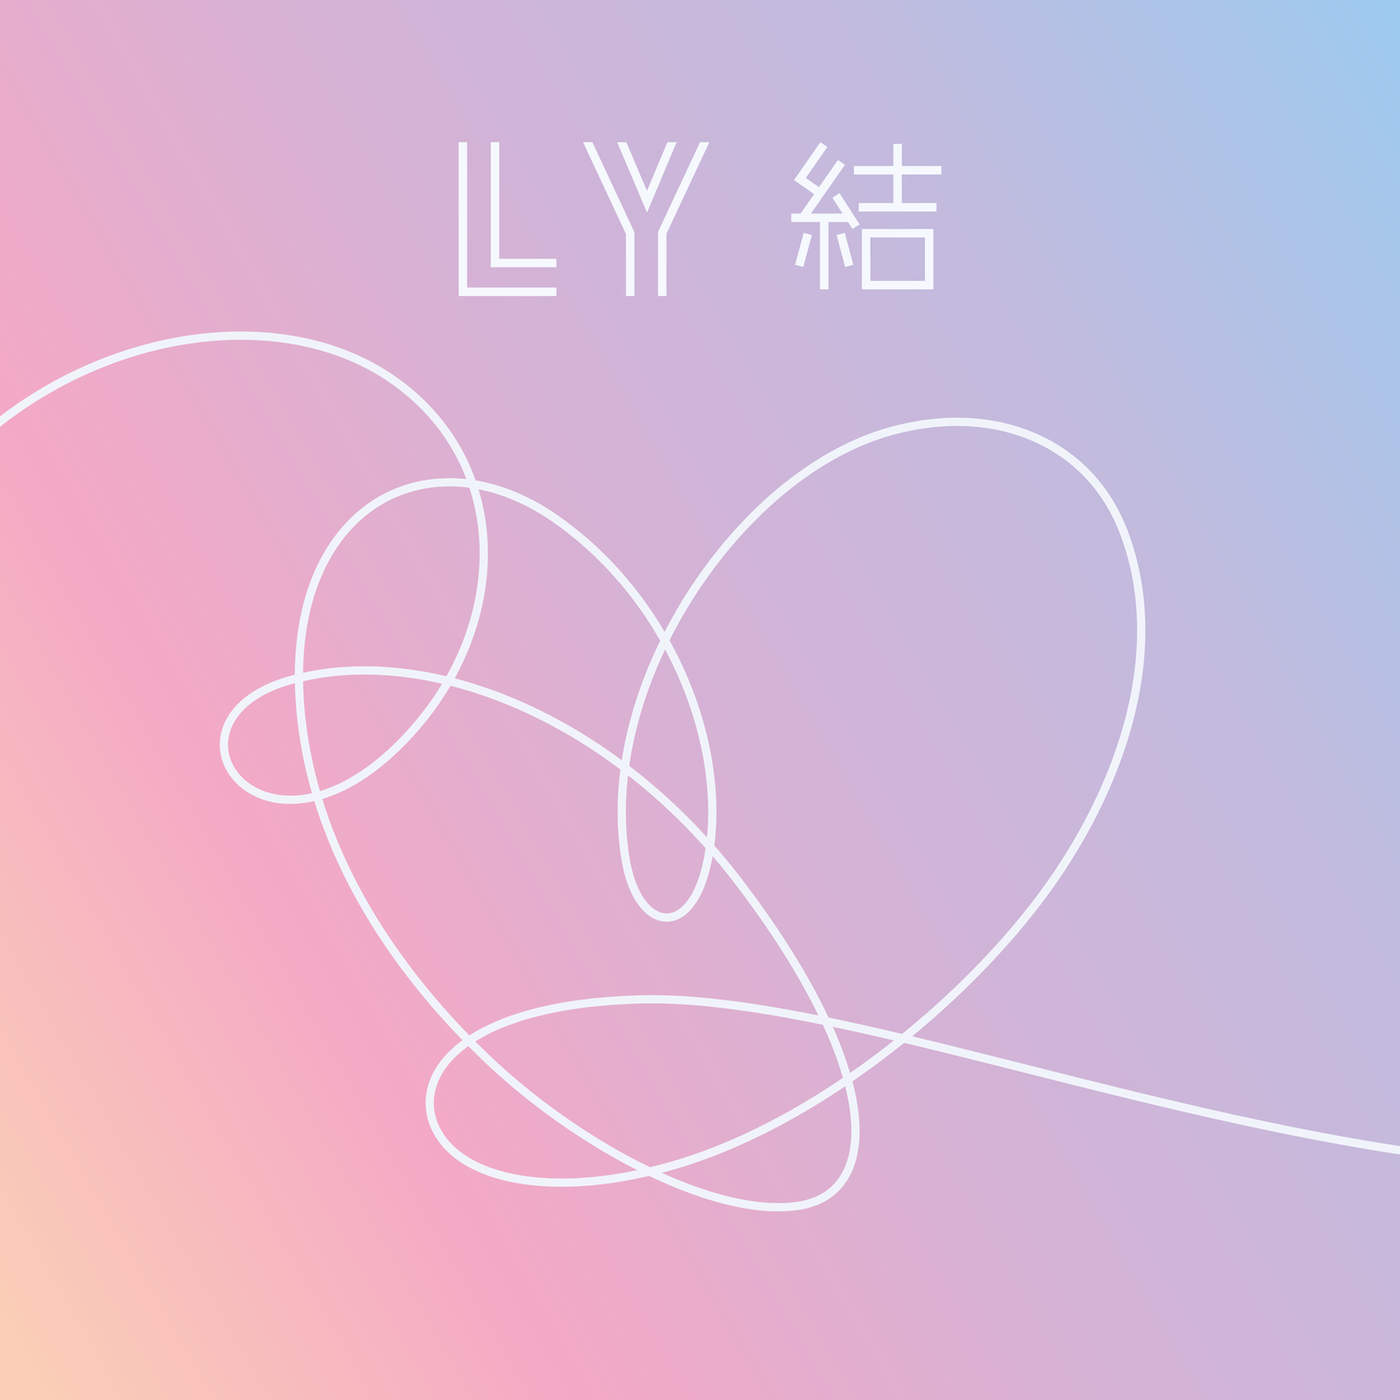 Review Bts New Album “love Yourself Answer” The Vision